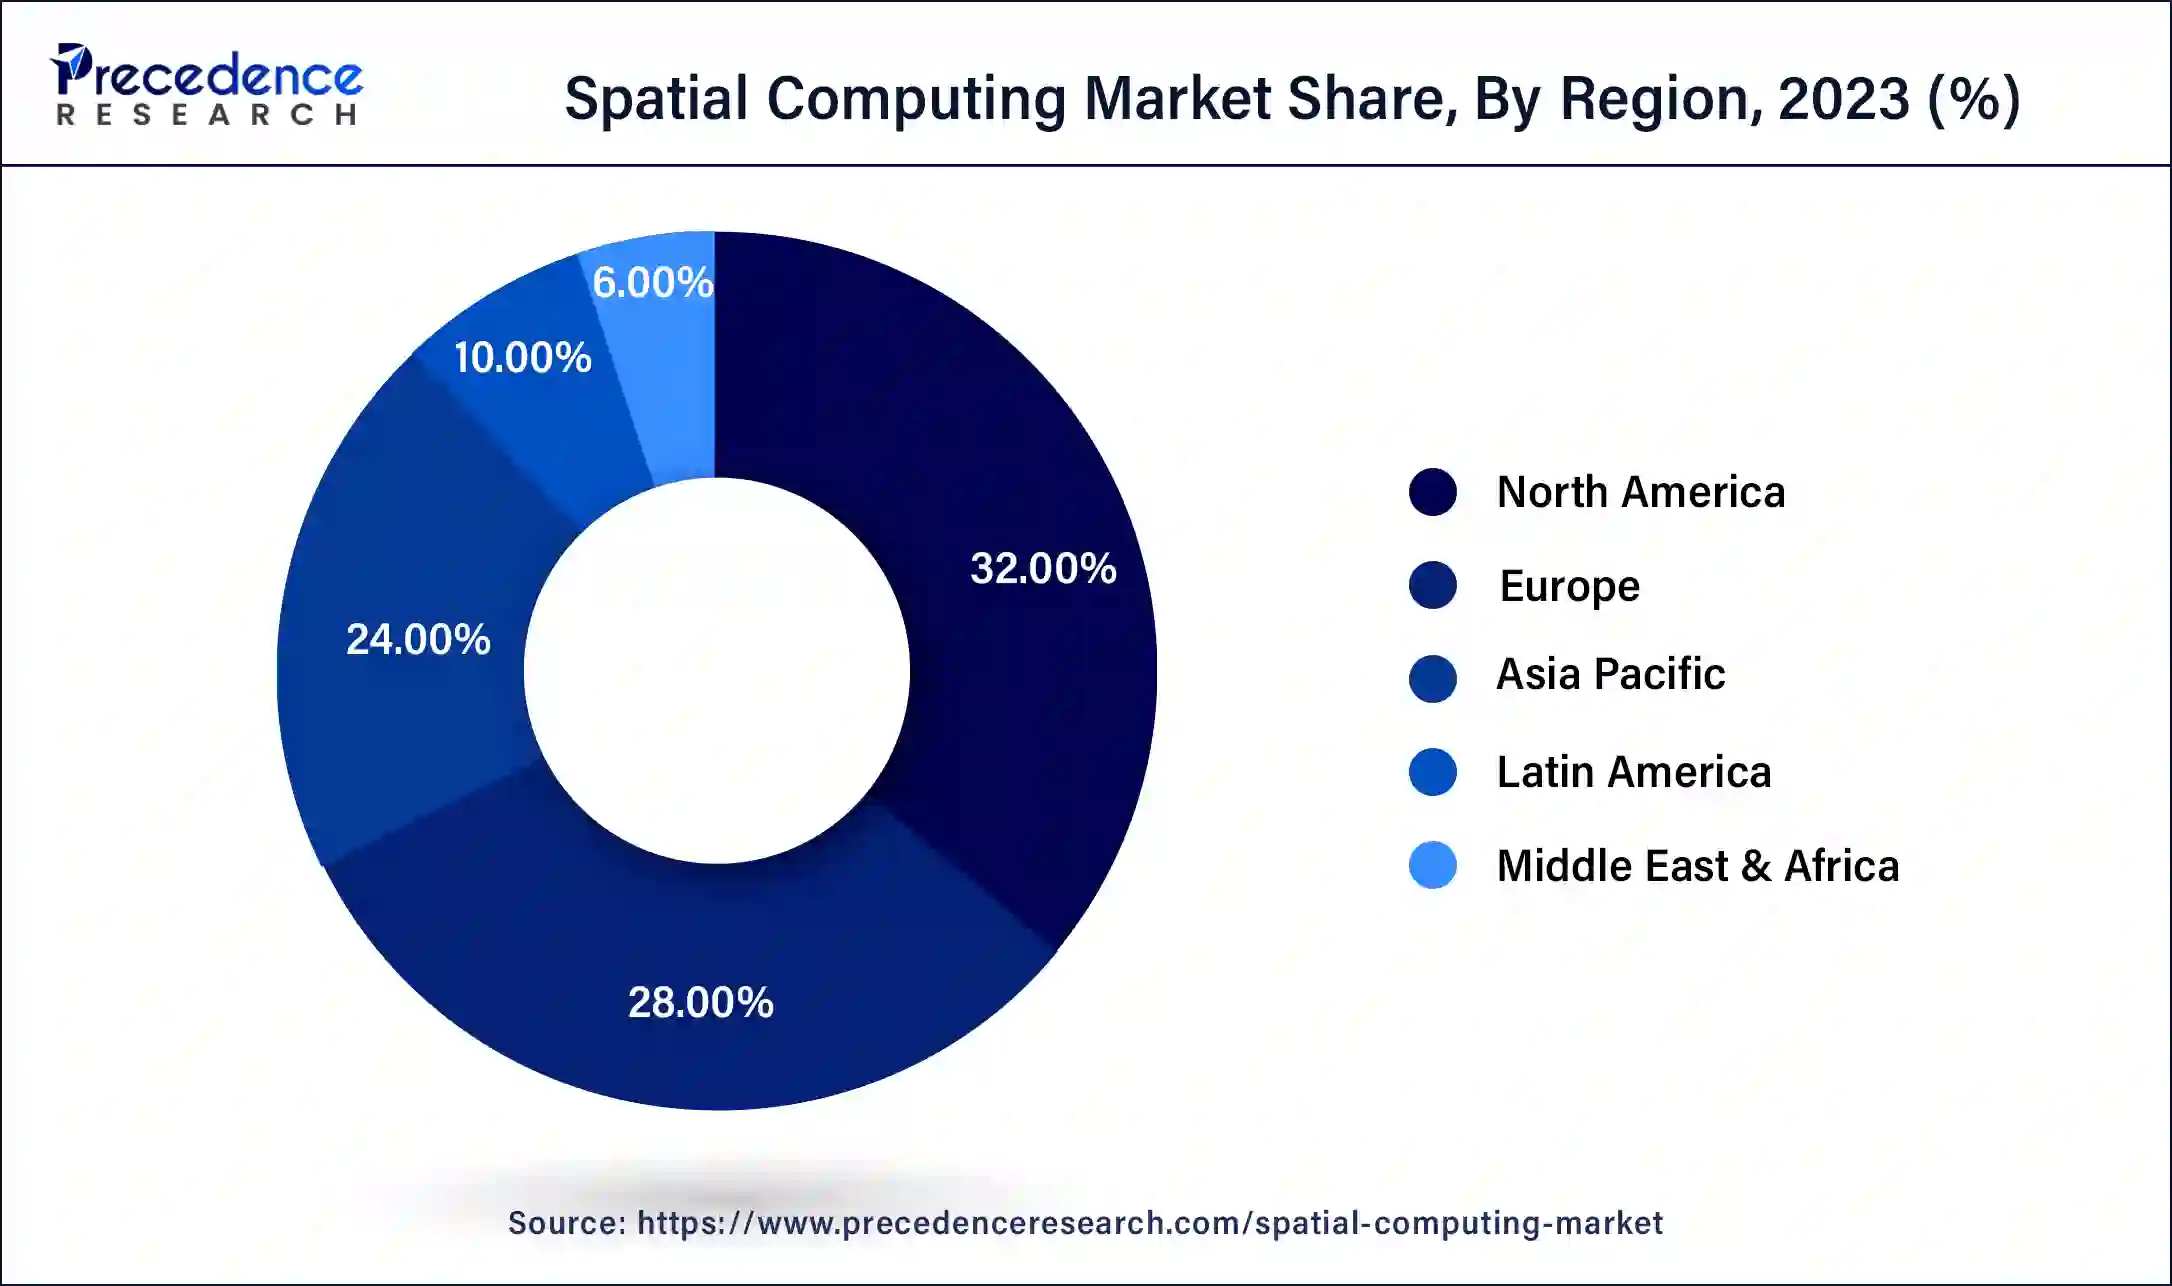 Spatial Computing Market Share, By Region, 2023 (%)